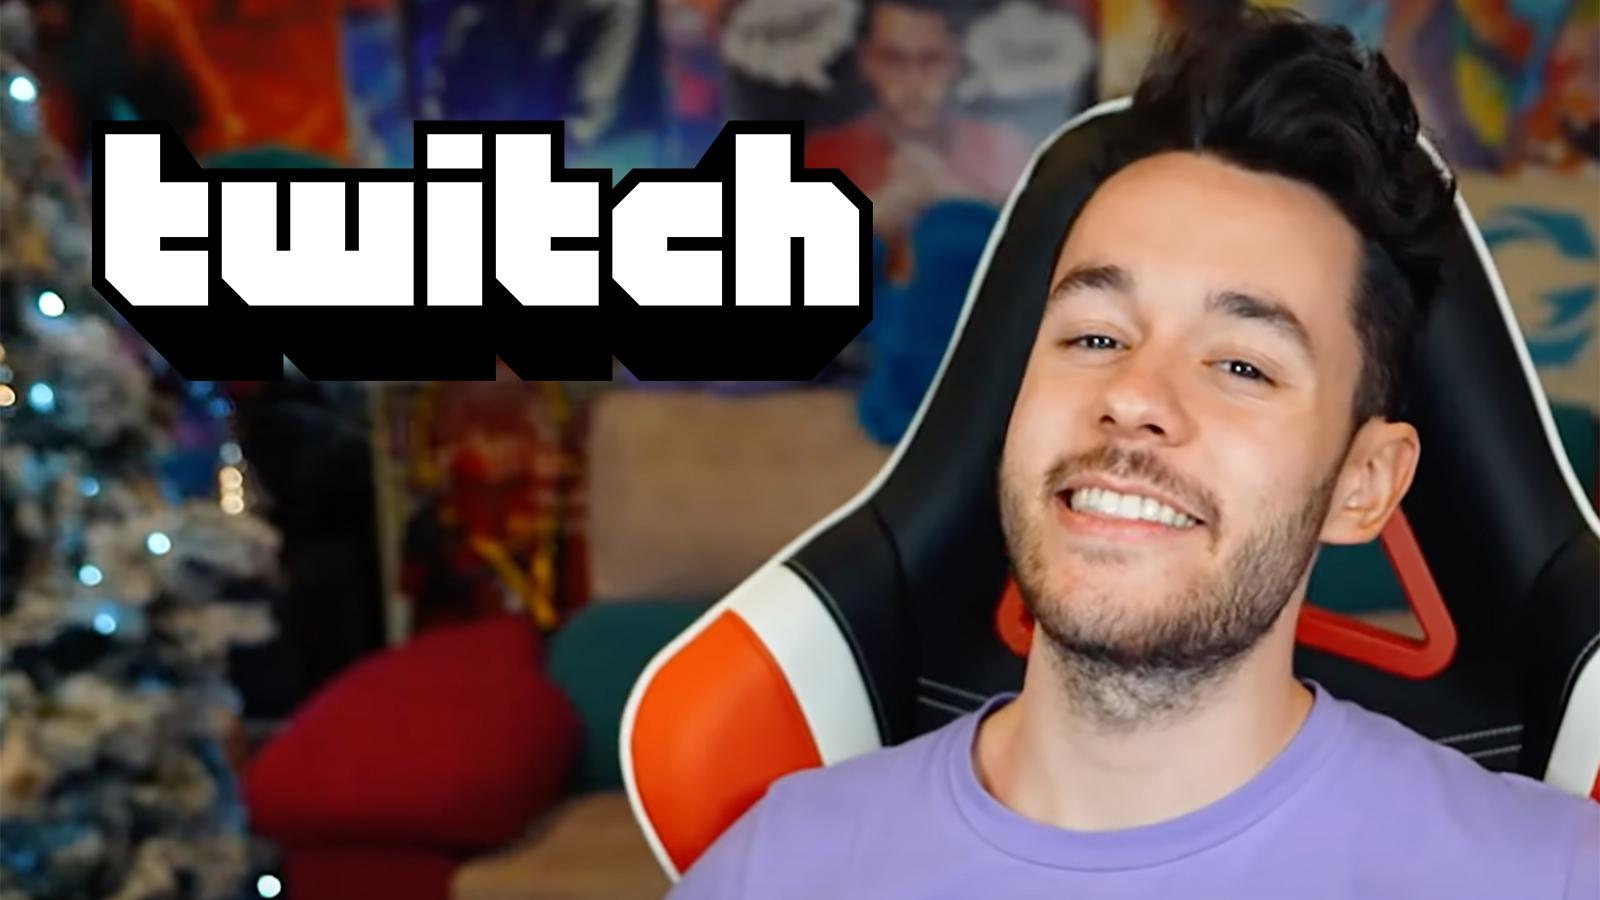 Top Twitch Streamers Setting the Standard for Gaming Content